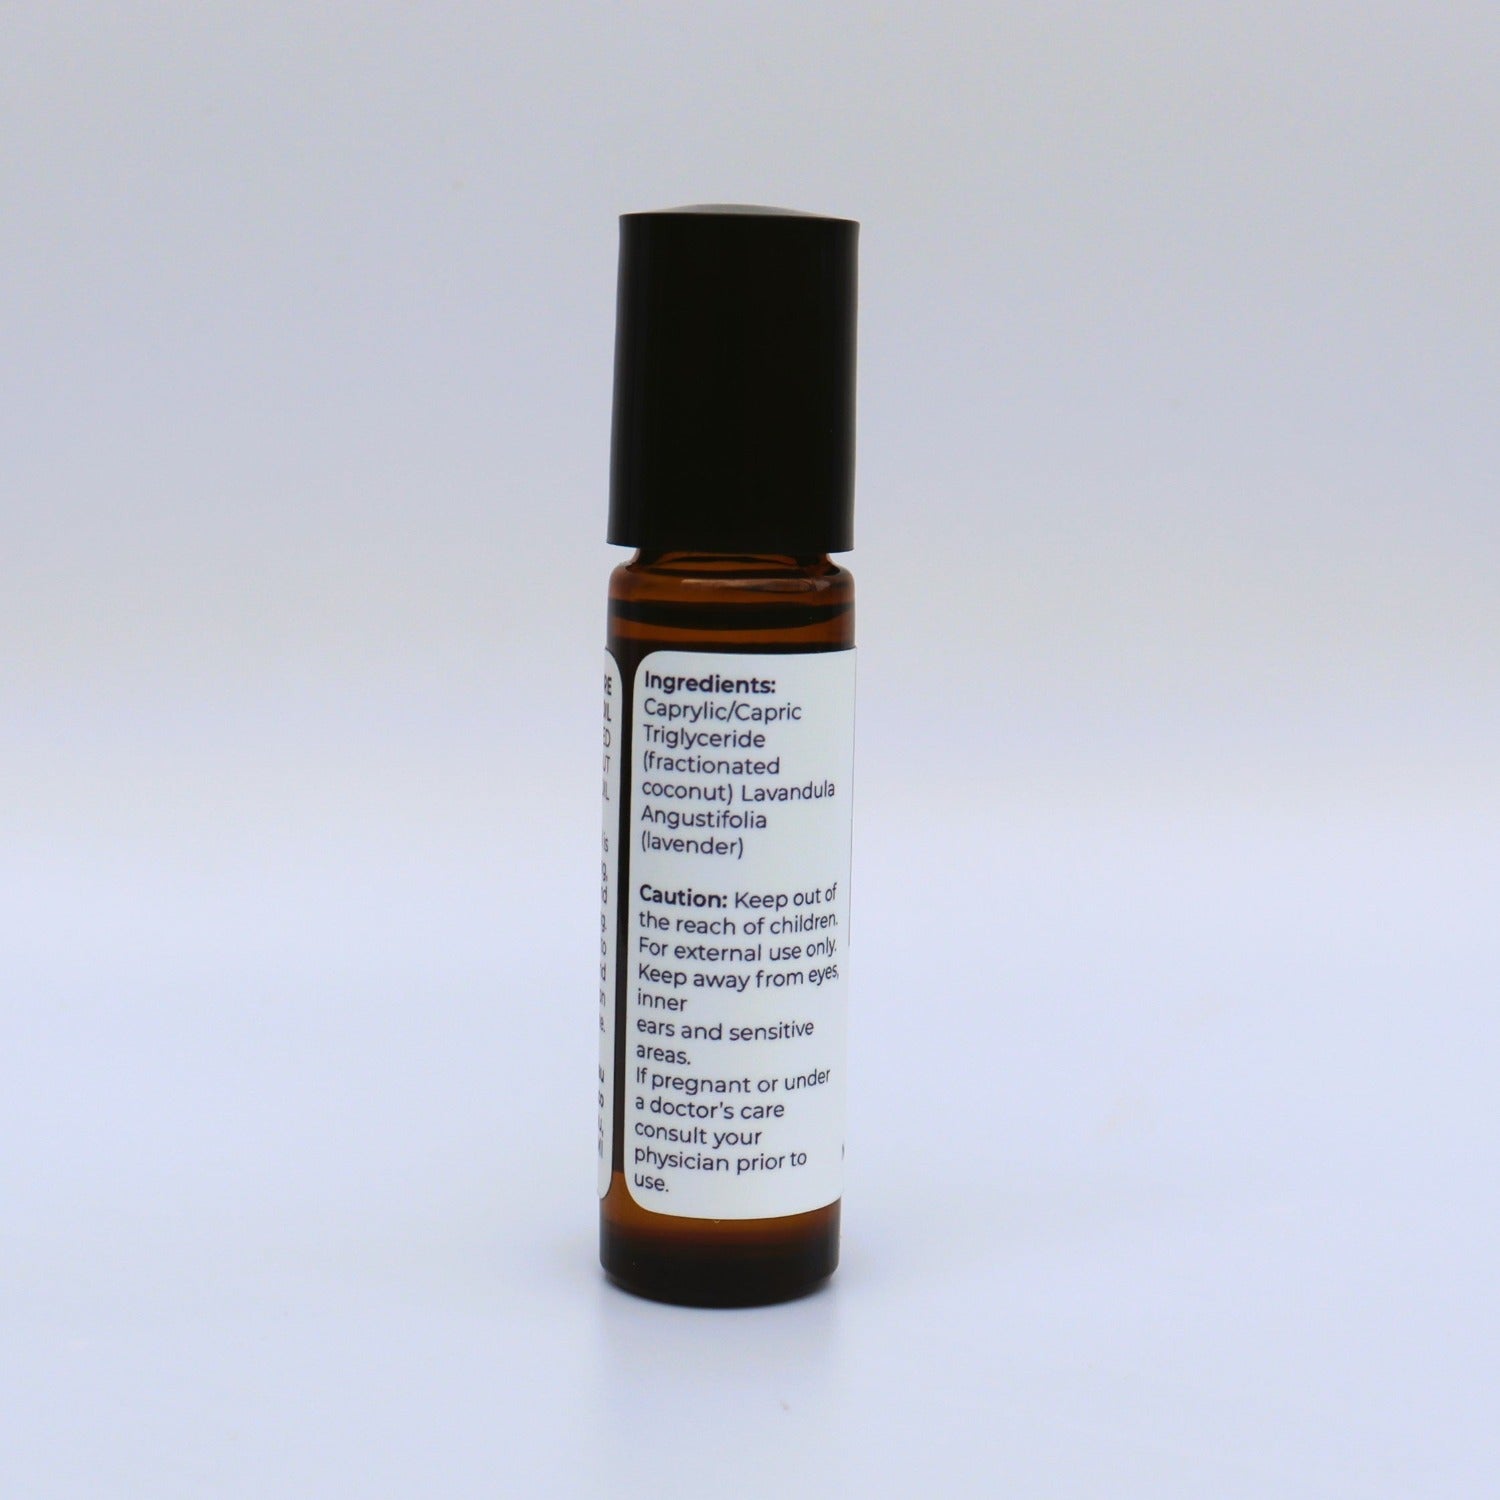 Roll-On Lavender Essential Oil